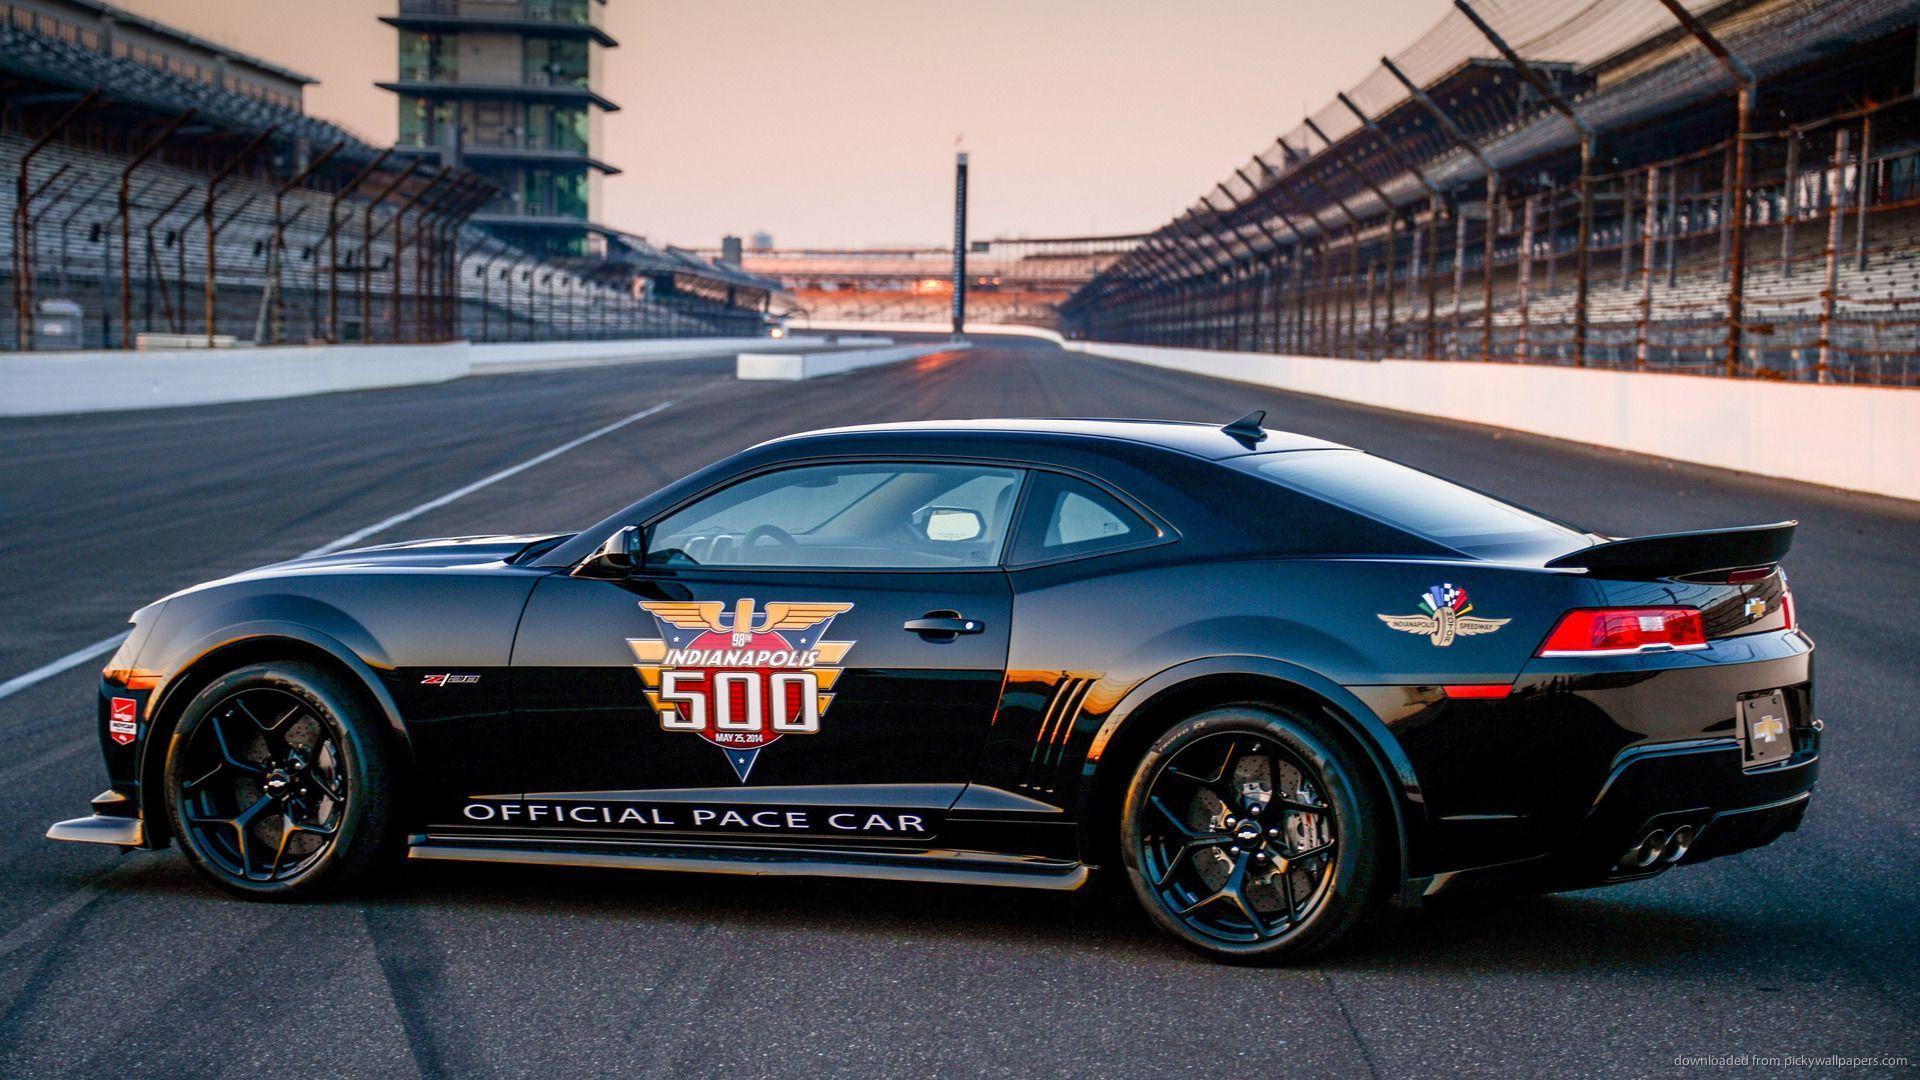 Chevrolet Camaro Z28 Indy 500 Pace Car Side View Wallpaper